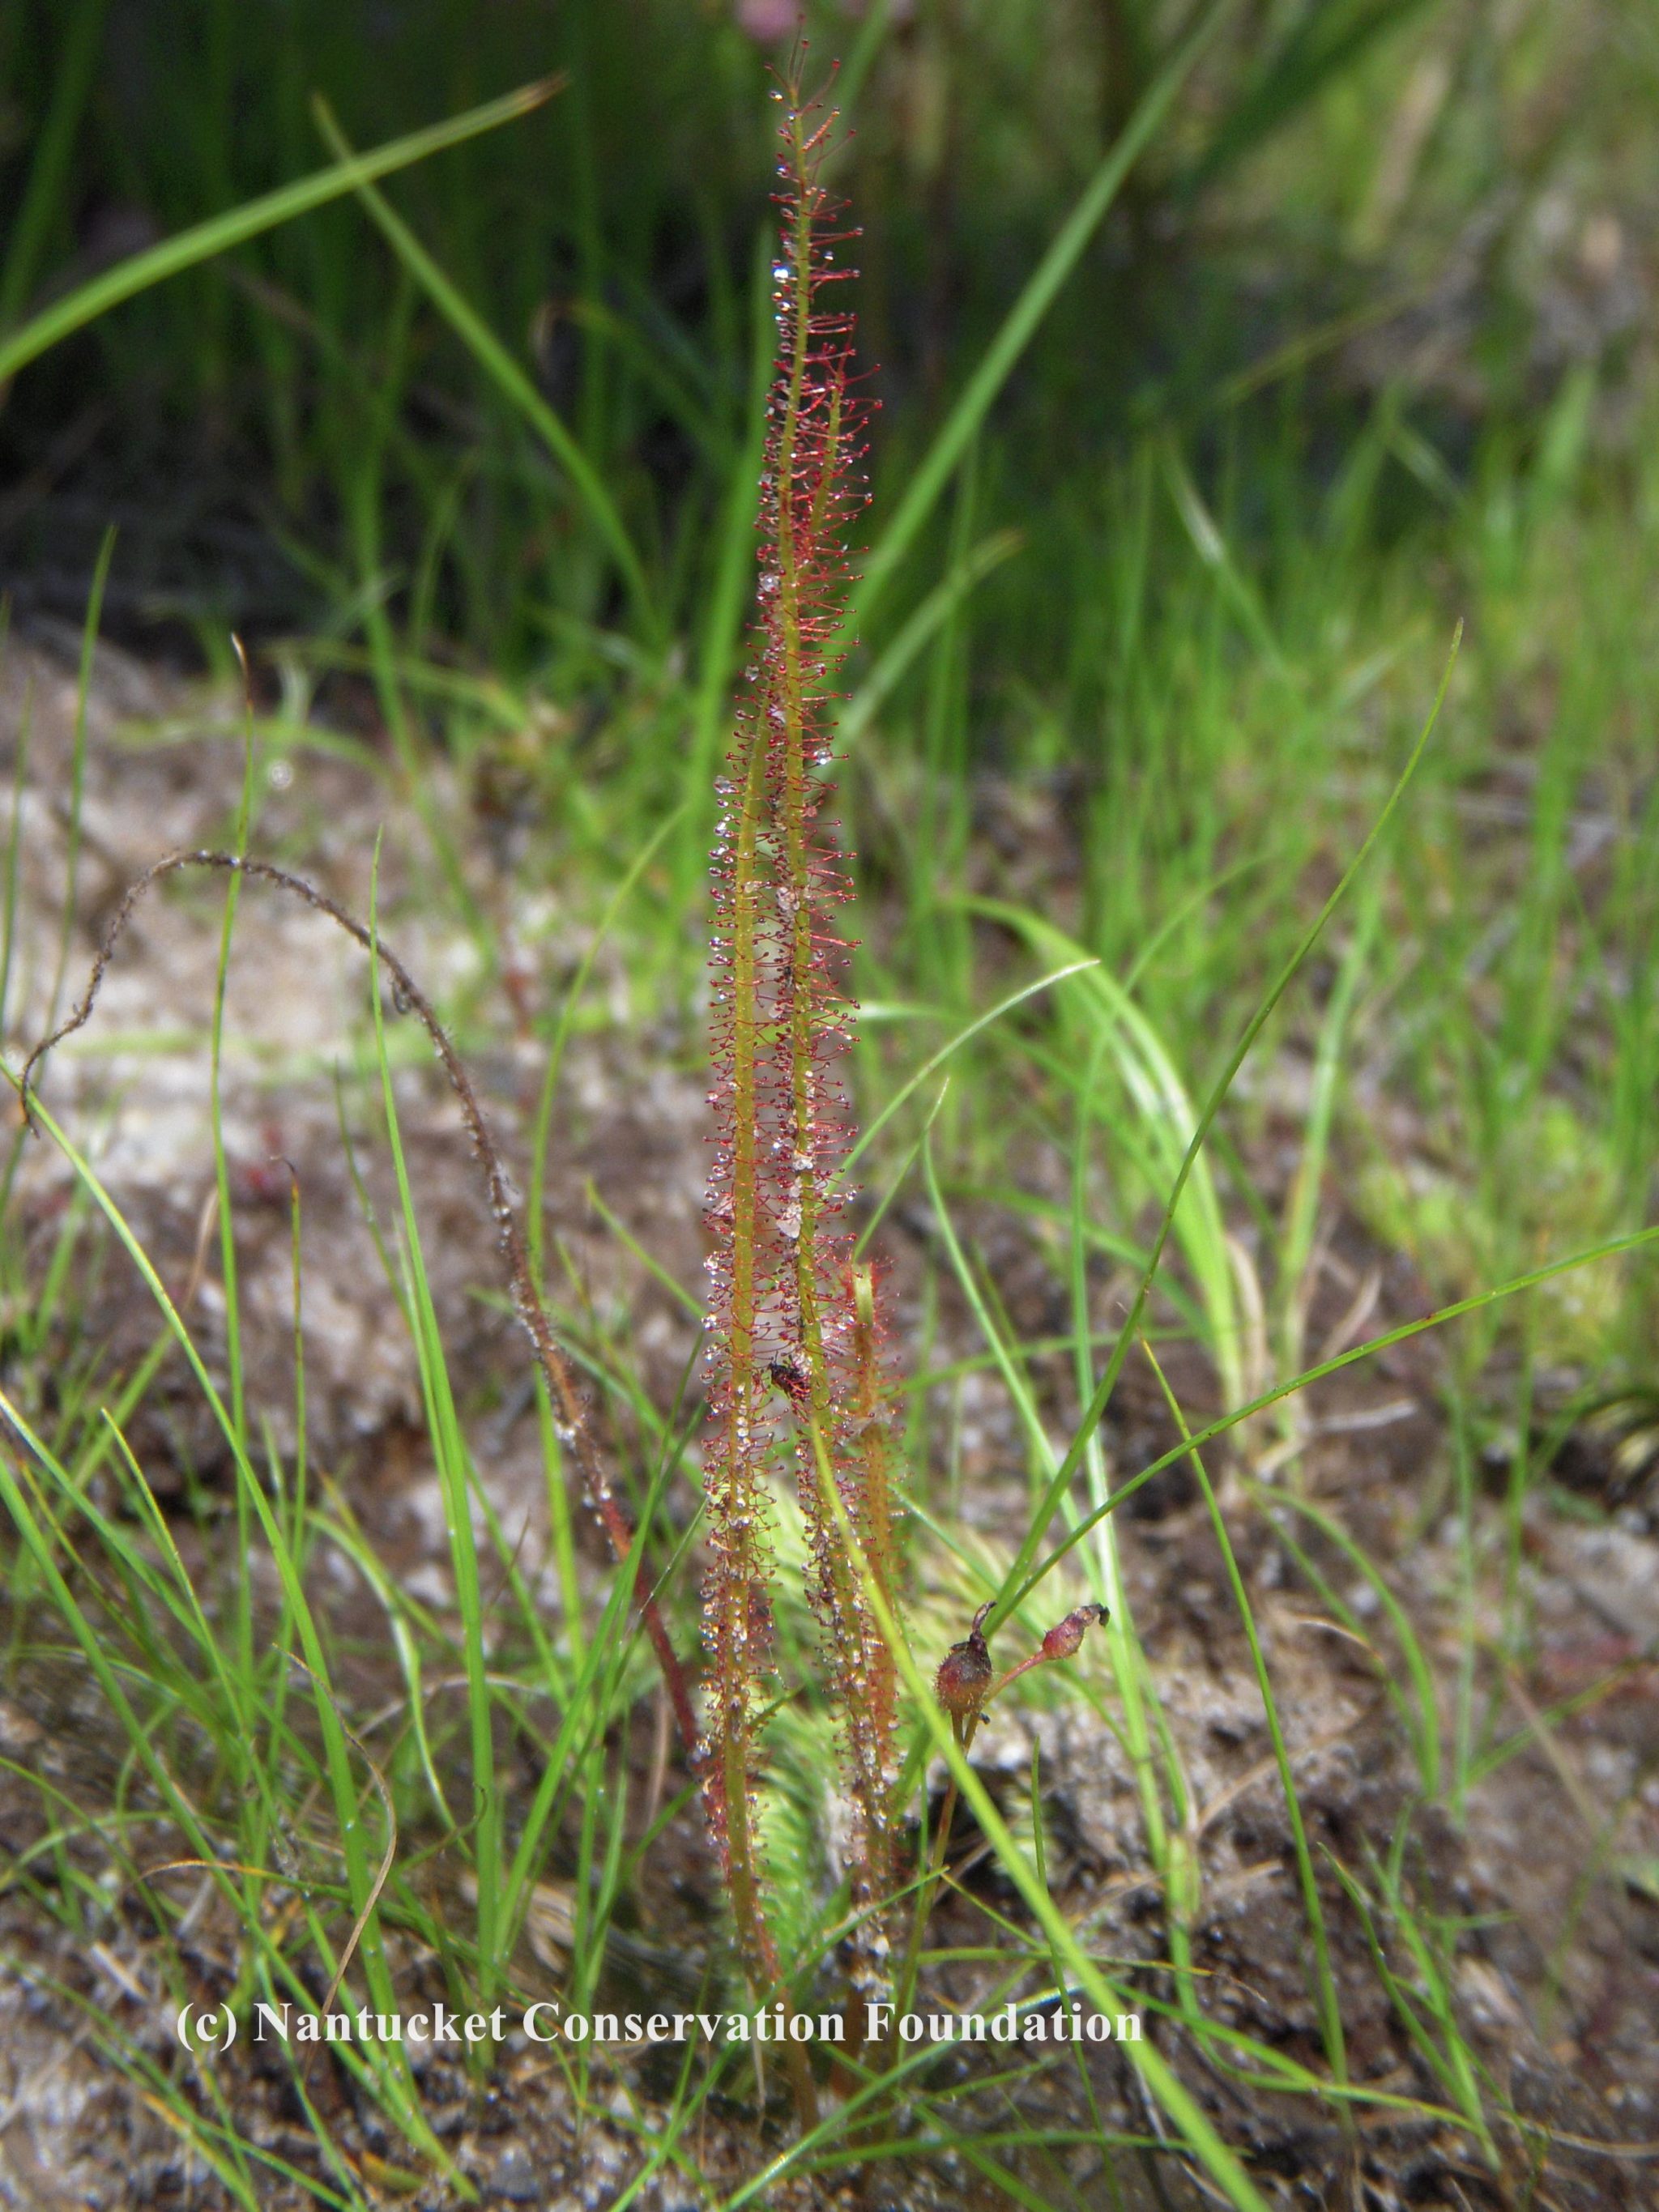 The linear leaved sundew with long, skinny nectar gland covered leaves.